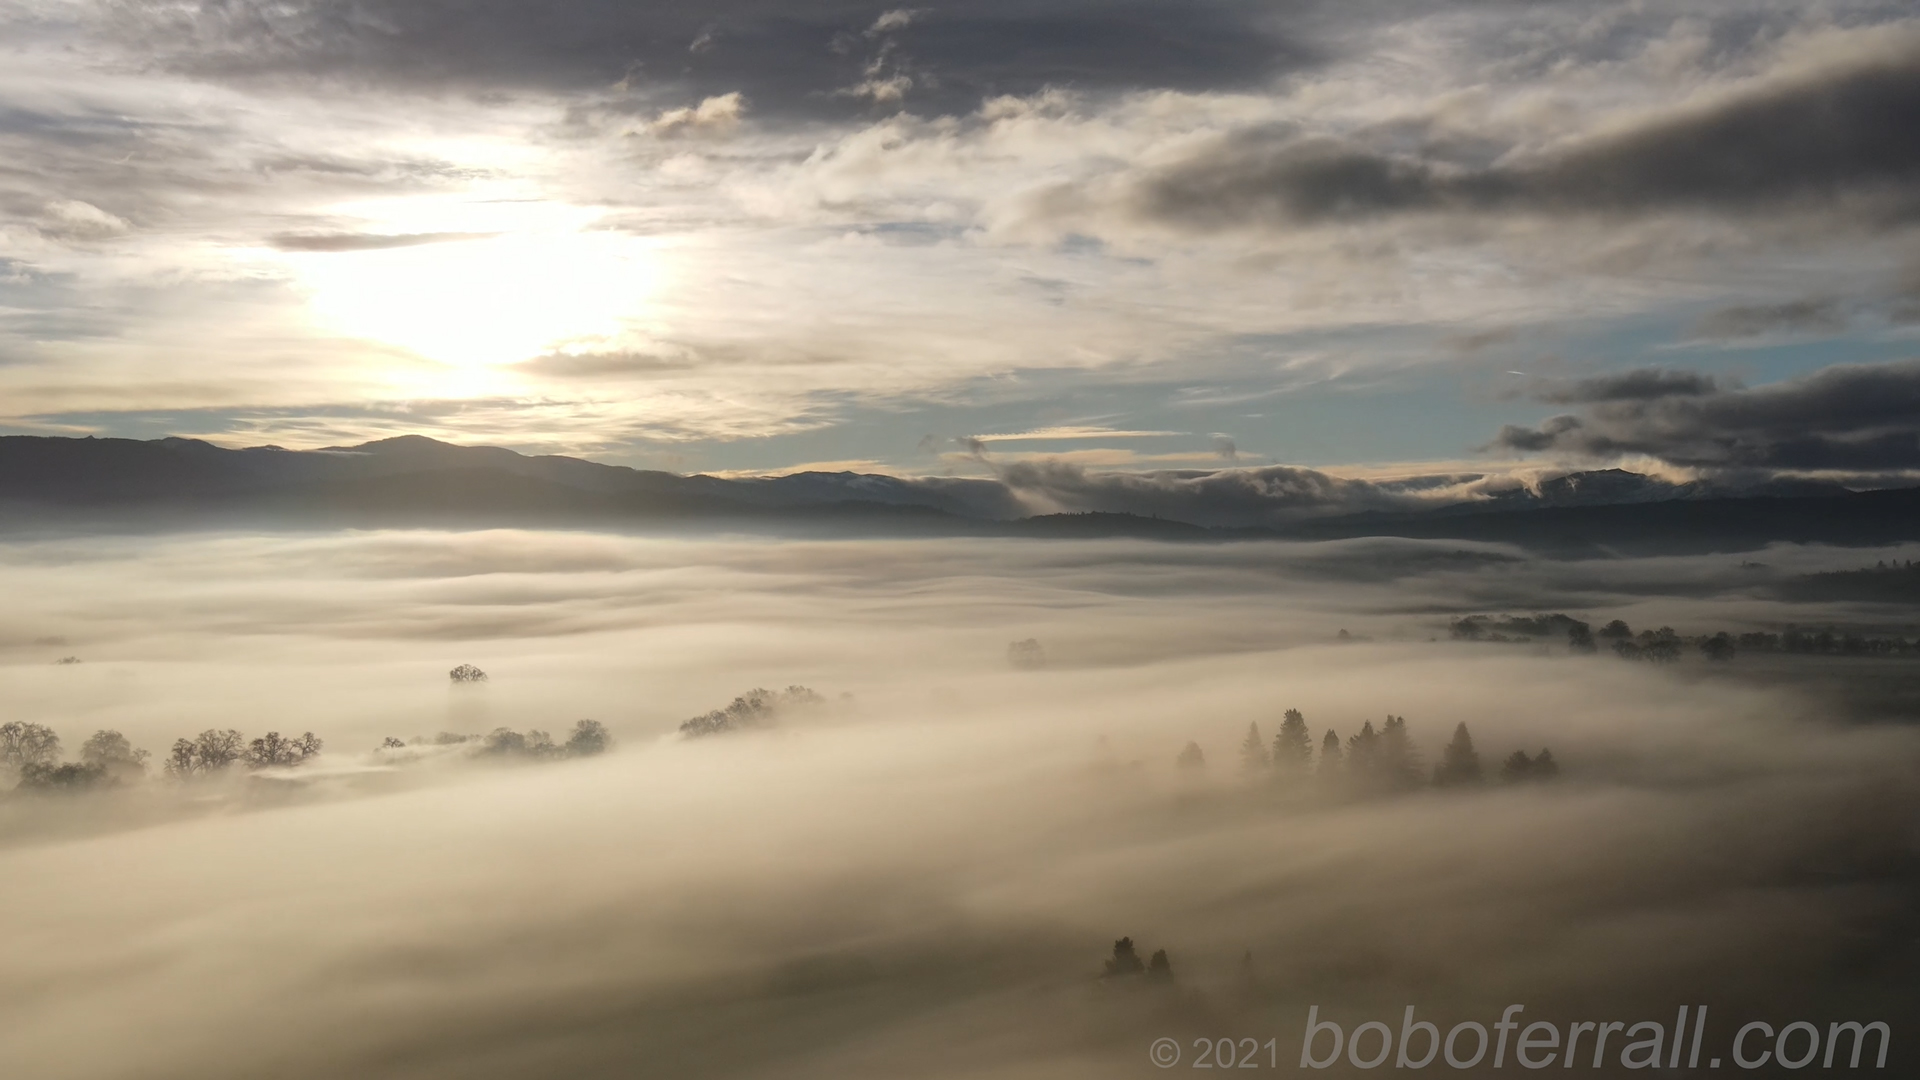 Round Valley Sunrise and Mountain Views over fog over Covelo, California December 20, 2021 at Covelo, CA-USA By Robert OFerrall